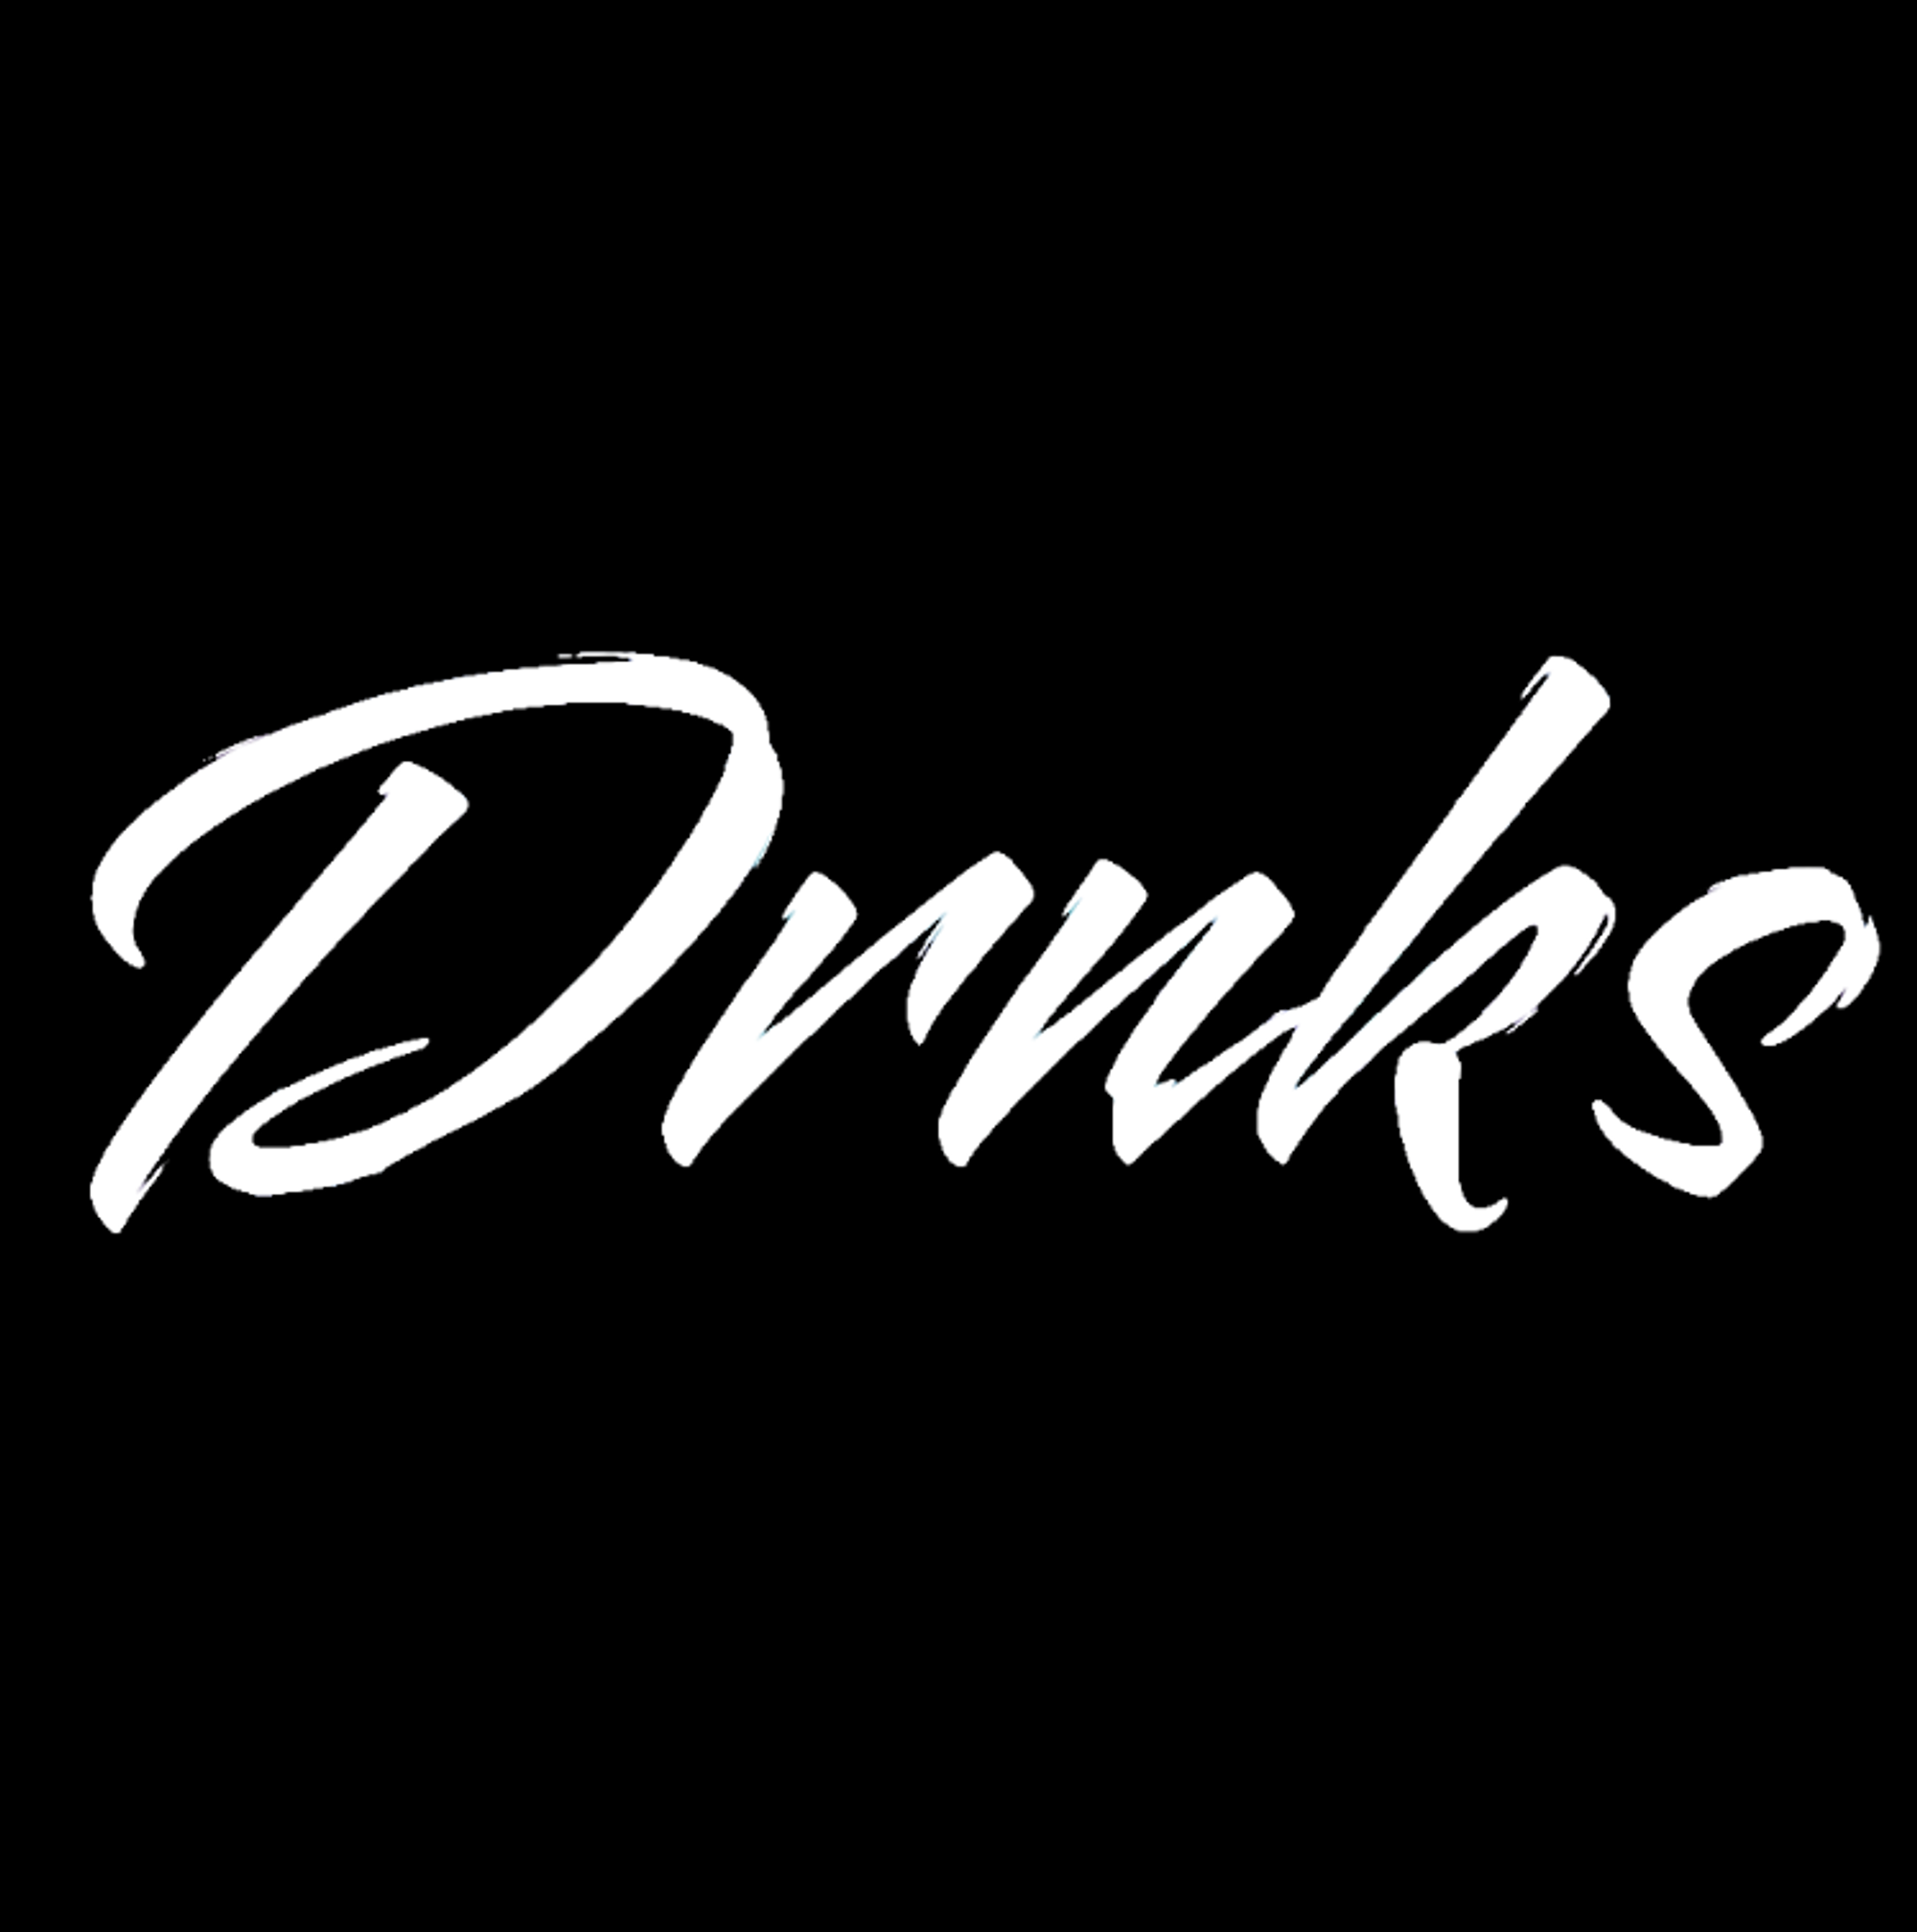 Drnks - an exclusive, invite-only speakeasy for startup founders to chat anonymously. We're not opening it up to anyone so that it will stay exclusive.